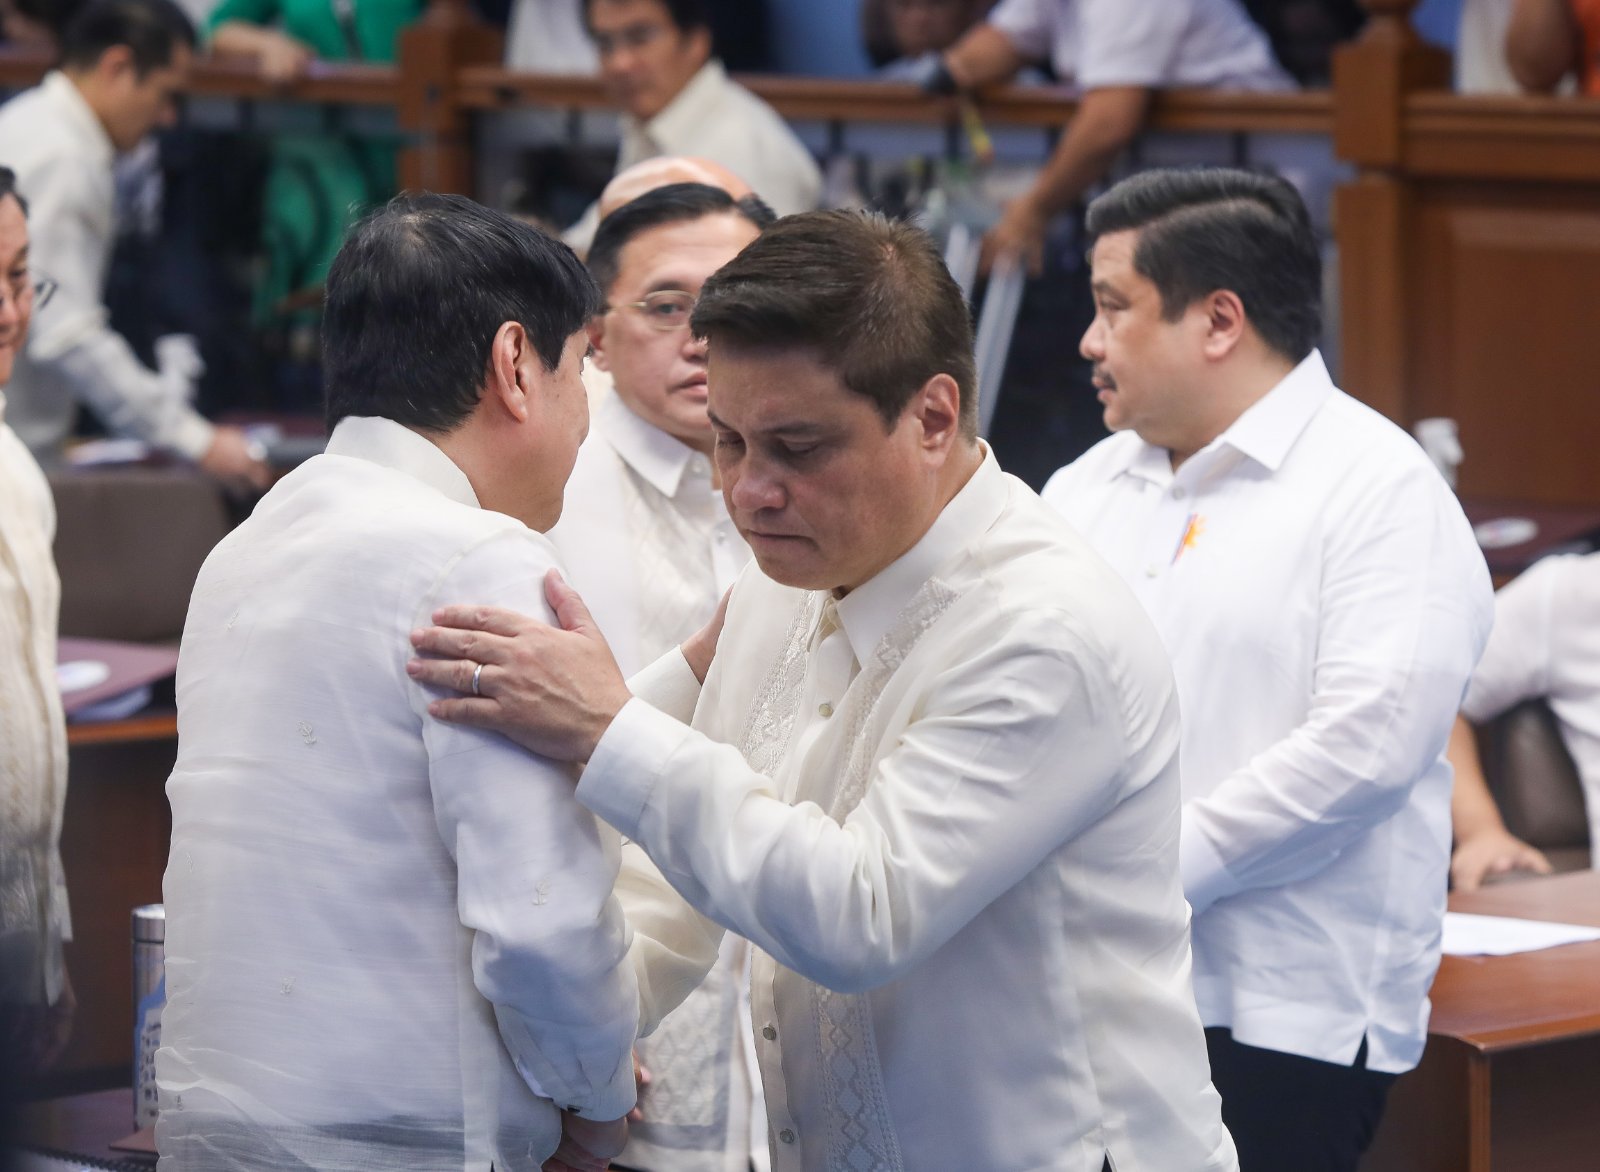 After resigning from his post, former Senate President Juan Miguel Zubiri said he would be taking a three-week break from the “nasty stabbing” in Philippine politics.